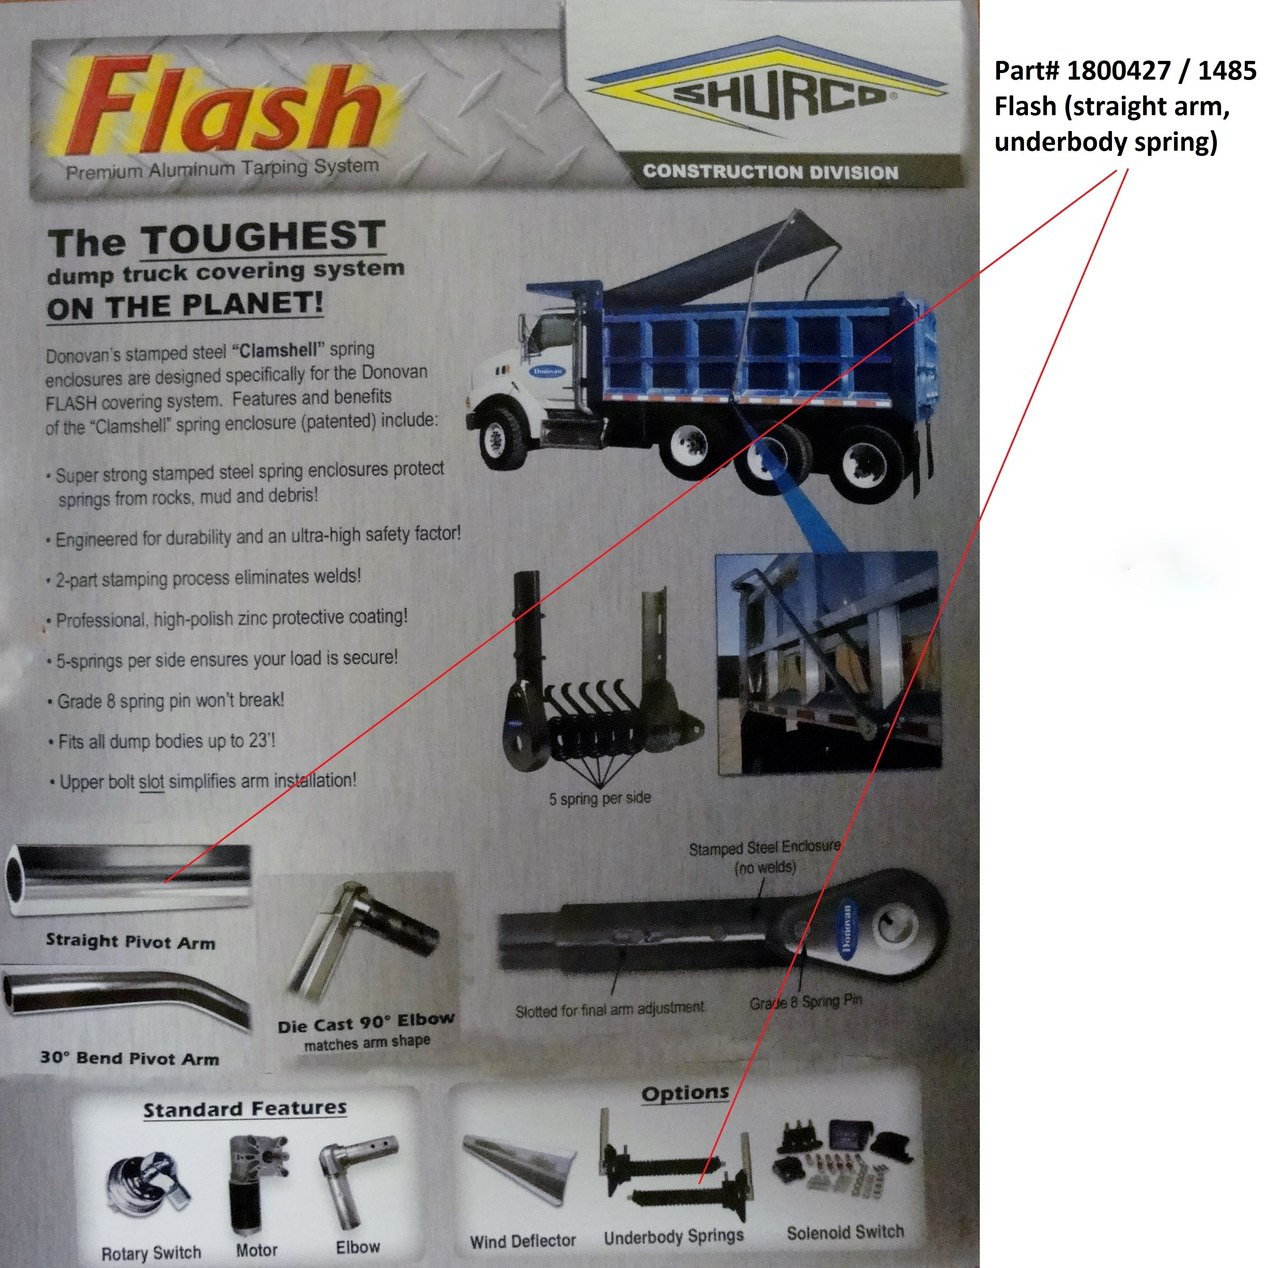 Flash w/Straight Arms - Underbody Spring - Complete System